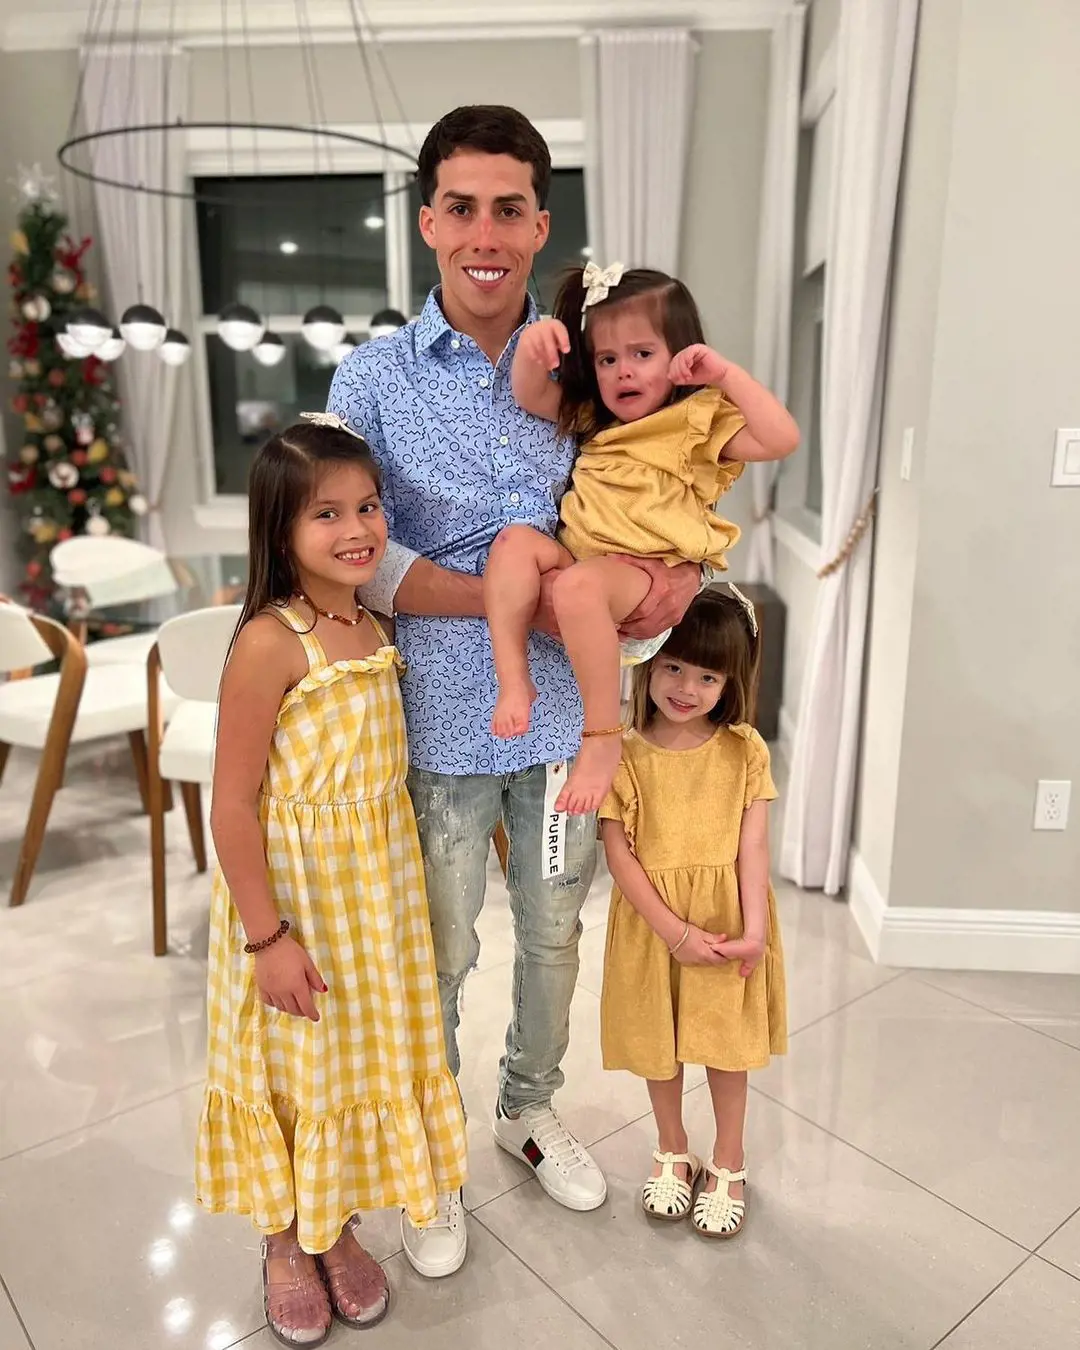 From left- Sarai, Irad holding Salome and Saeli celebrating the 2023 New Year together.